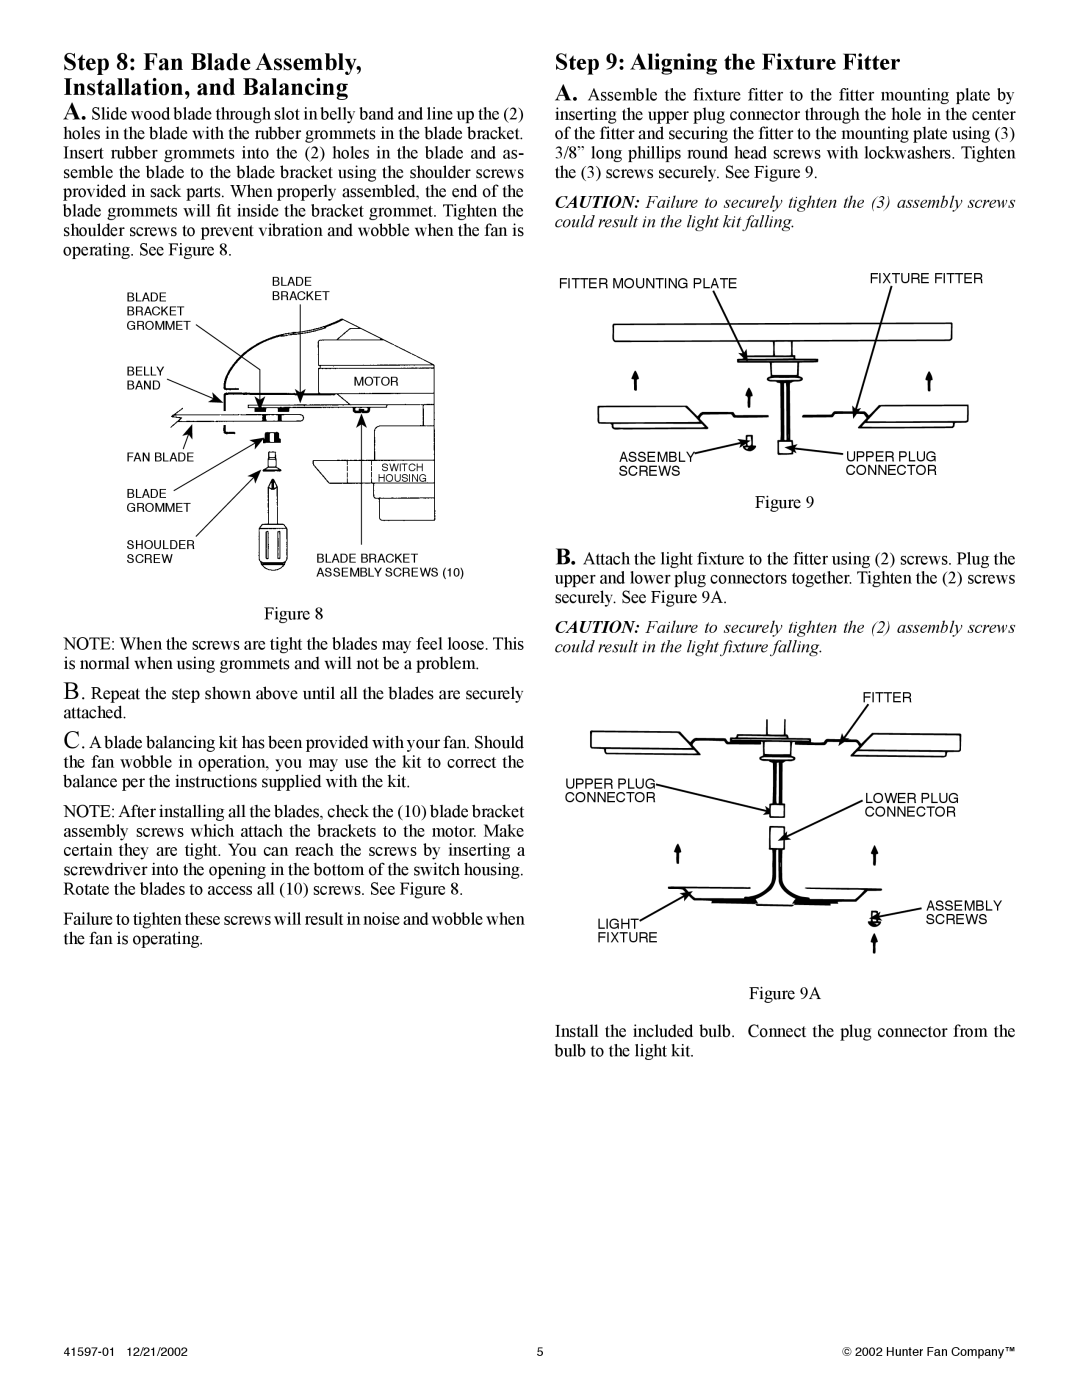 Hunter Fan 41597-01 installation instructions Fan Blade Assembly, Installation, and Balancing, Aligning the Fixture Fitter 